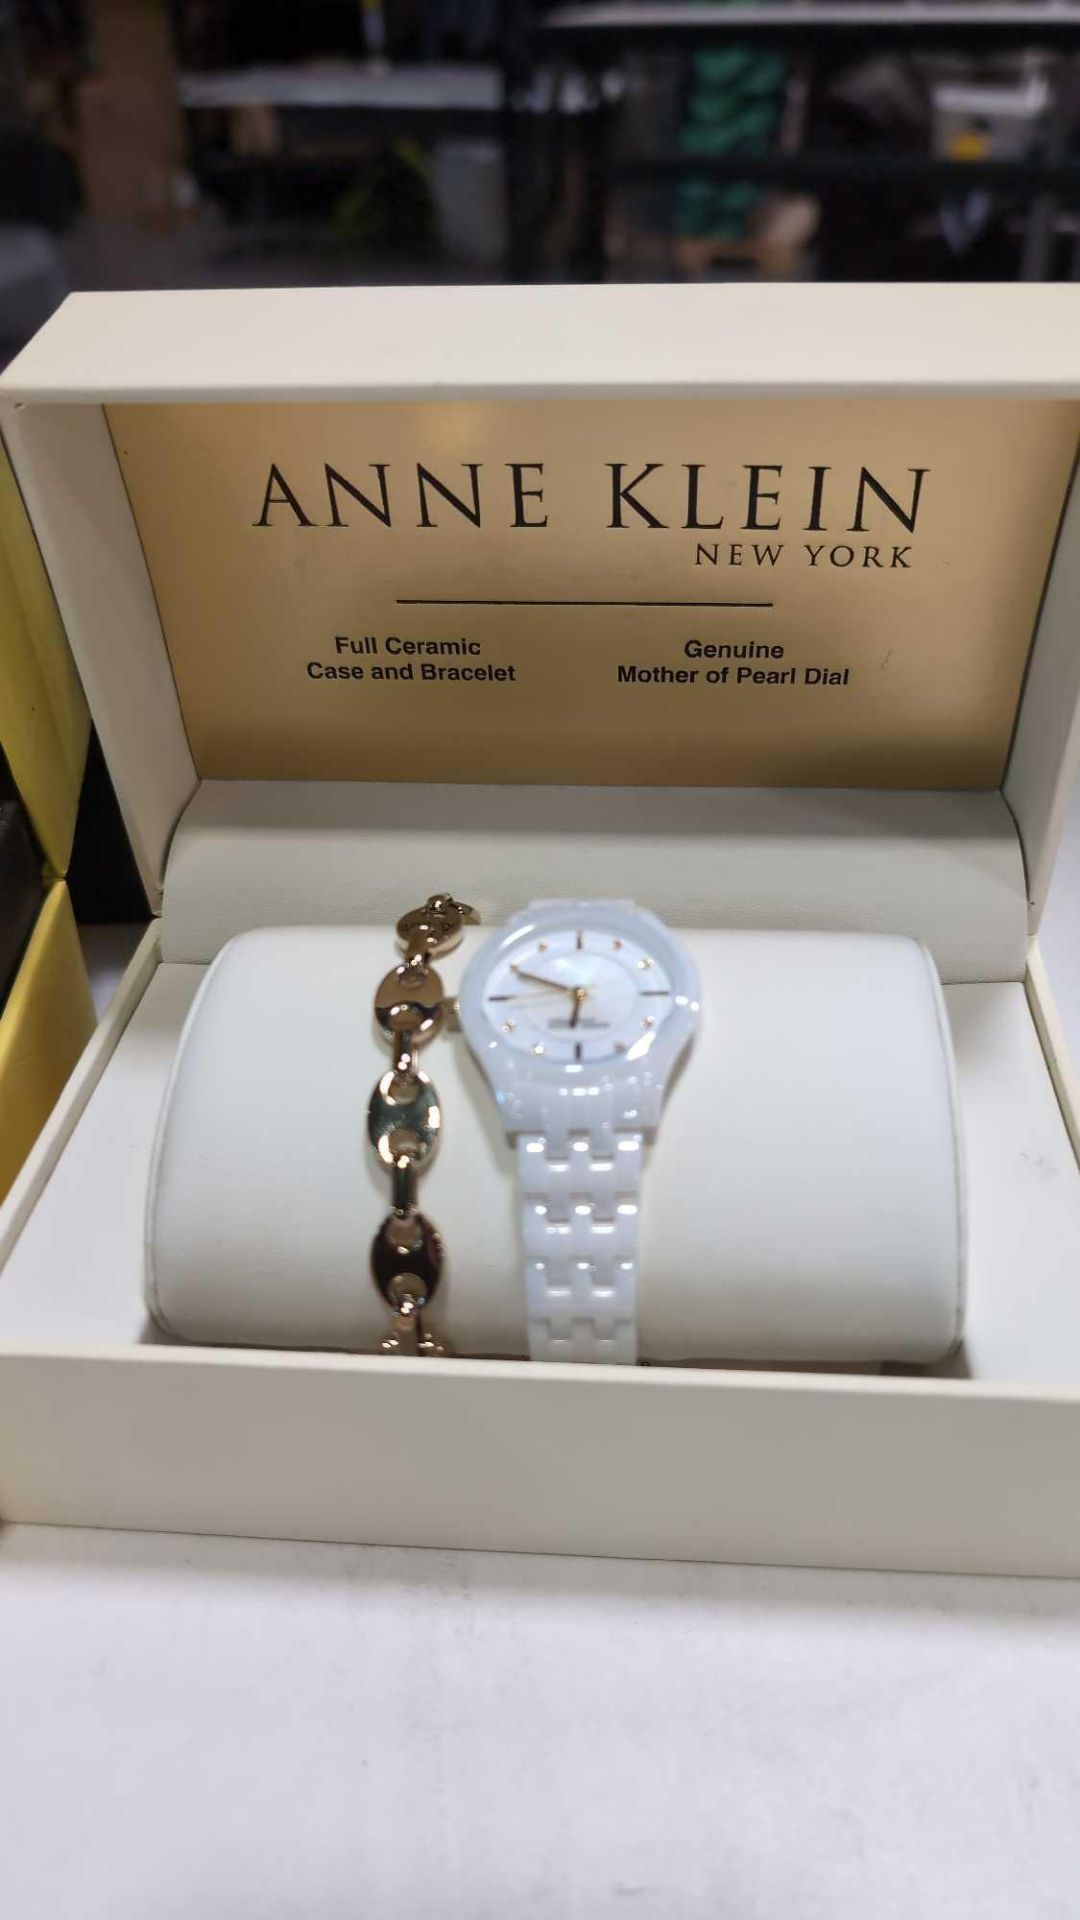 4 Watches: 3 Invicta and 1 Anne Klein - Image 2 of 6